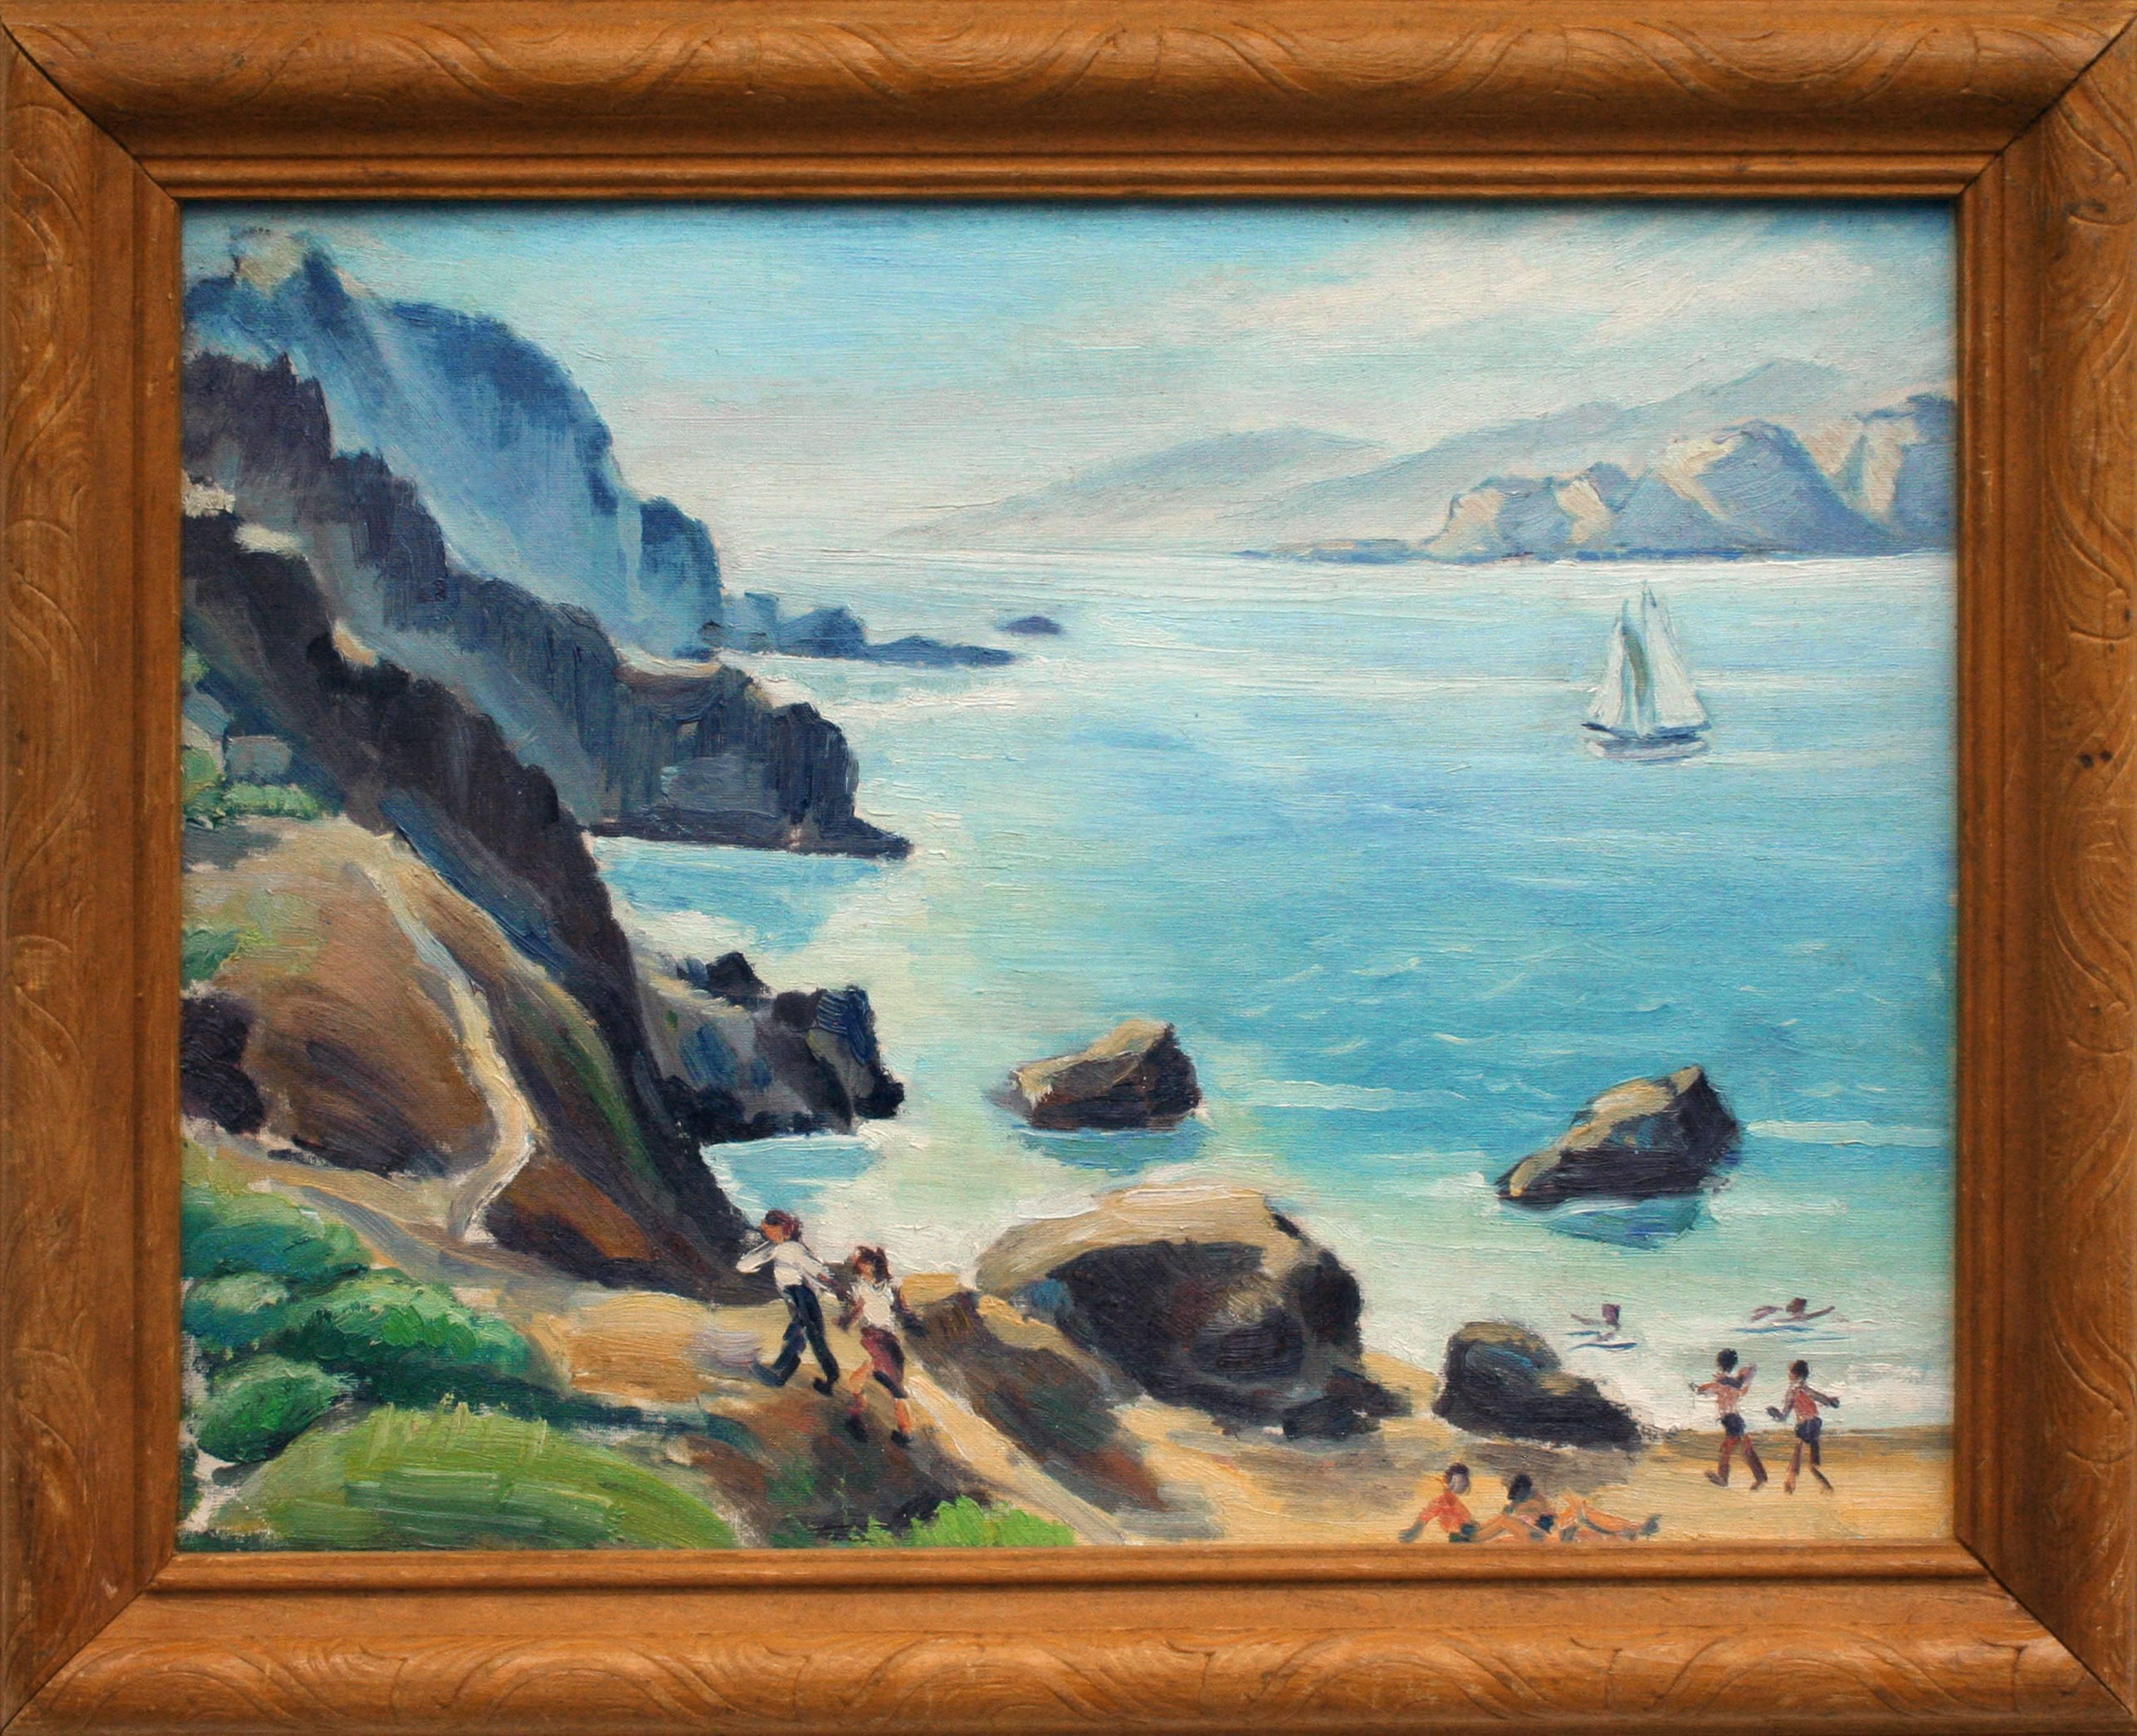 Unknown Figurative Painting - Mid Century Beach Day San Francisco Bay Landscape 